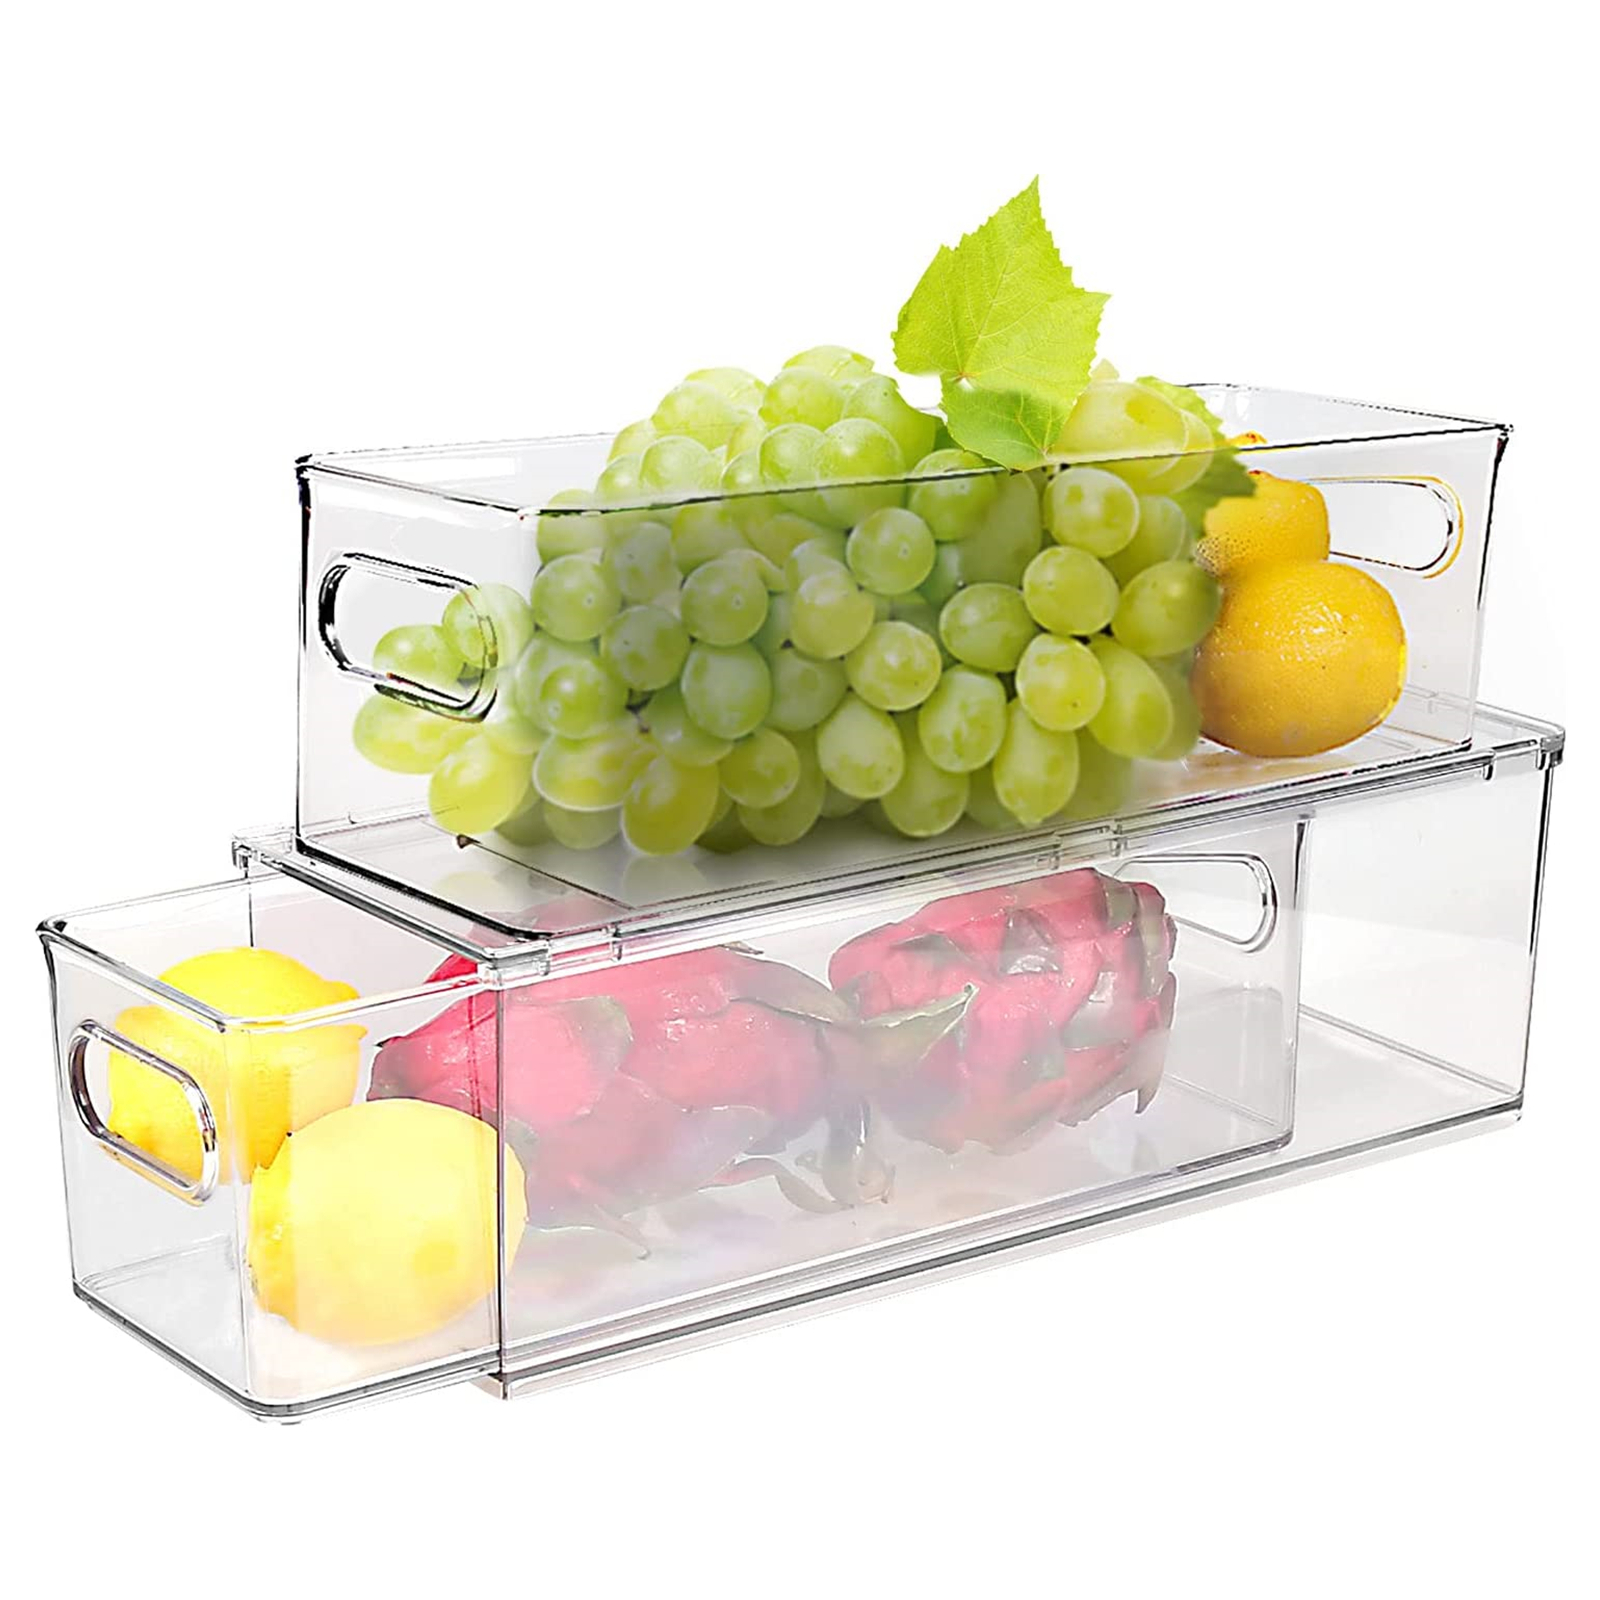 Shopwithgreen Refrigerator Organizer Bins with Pull-out Drawer - 2pcs Small-shopwithgreen